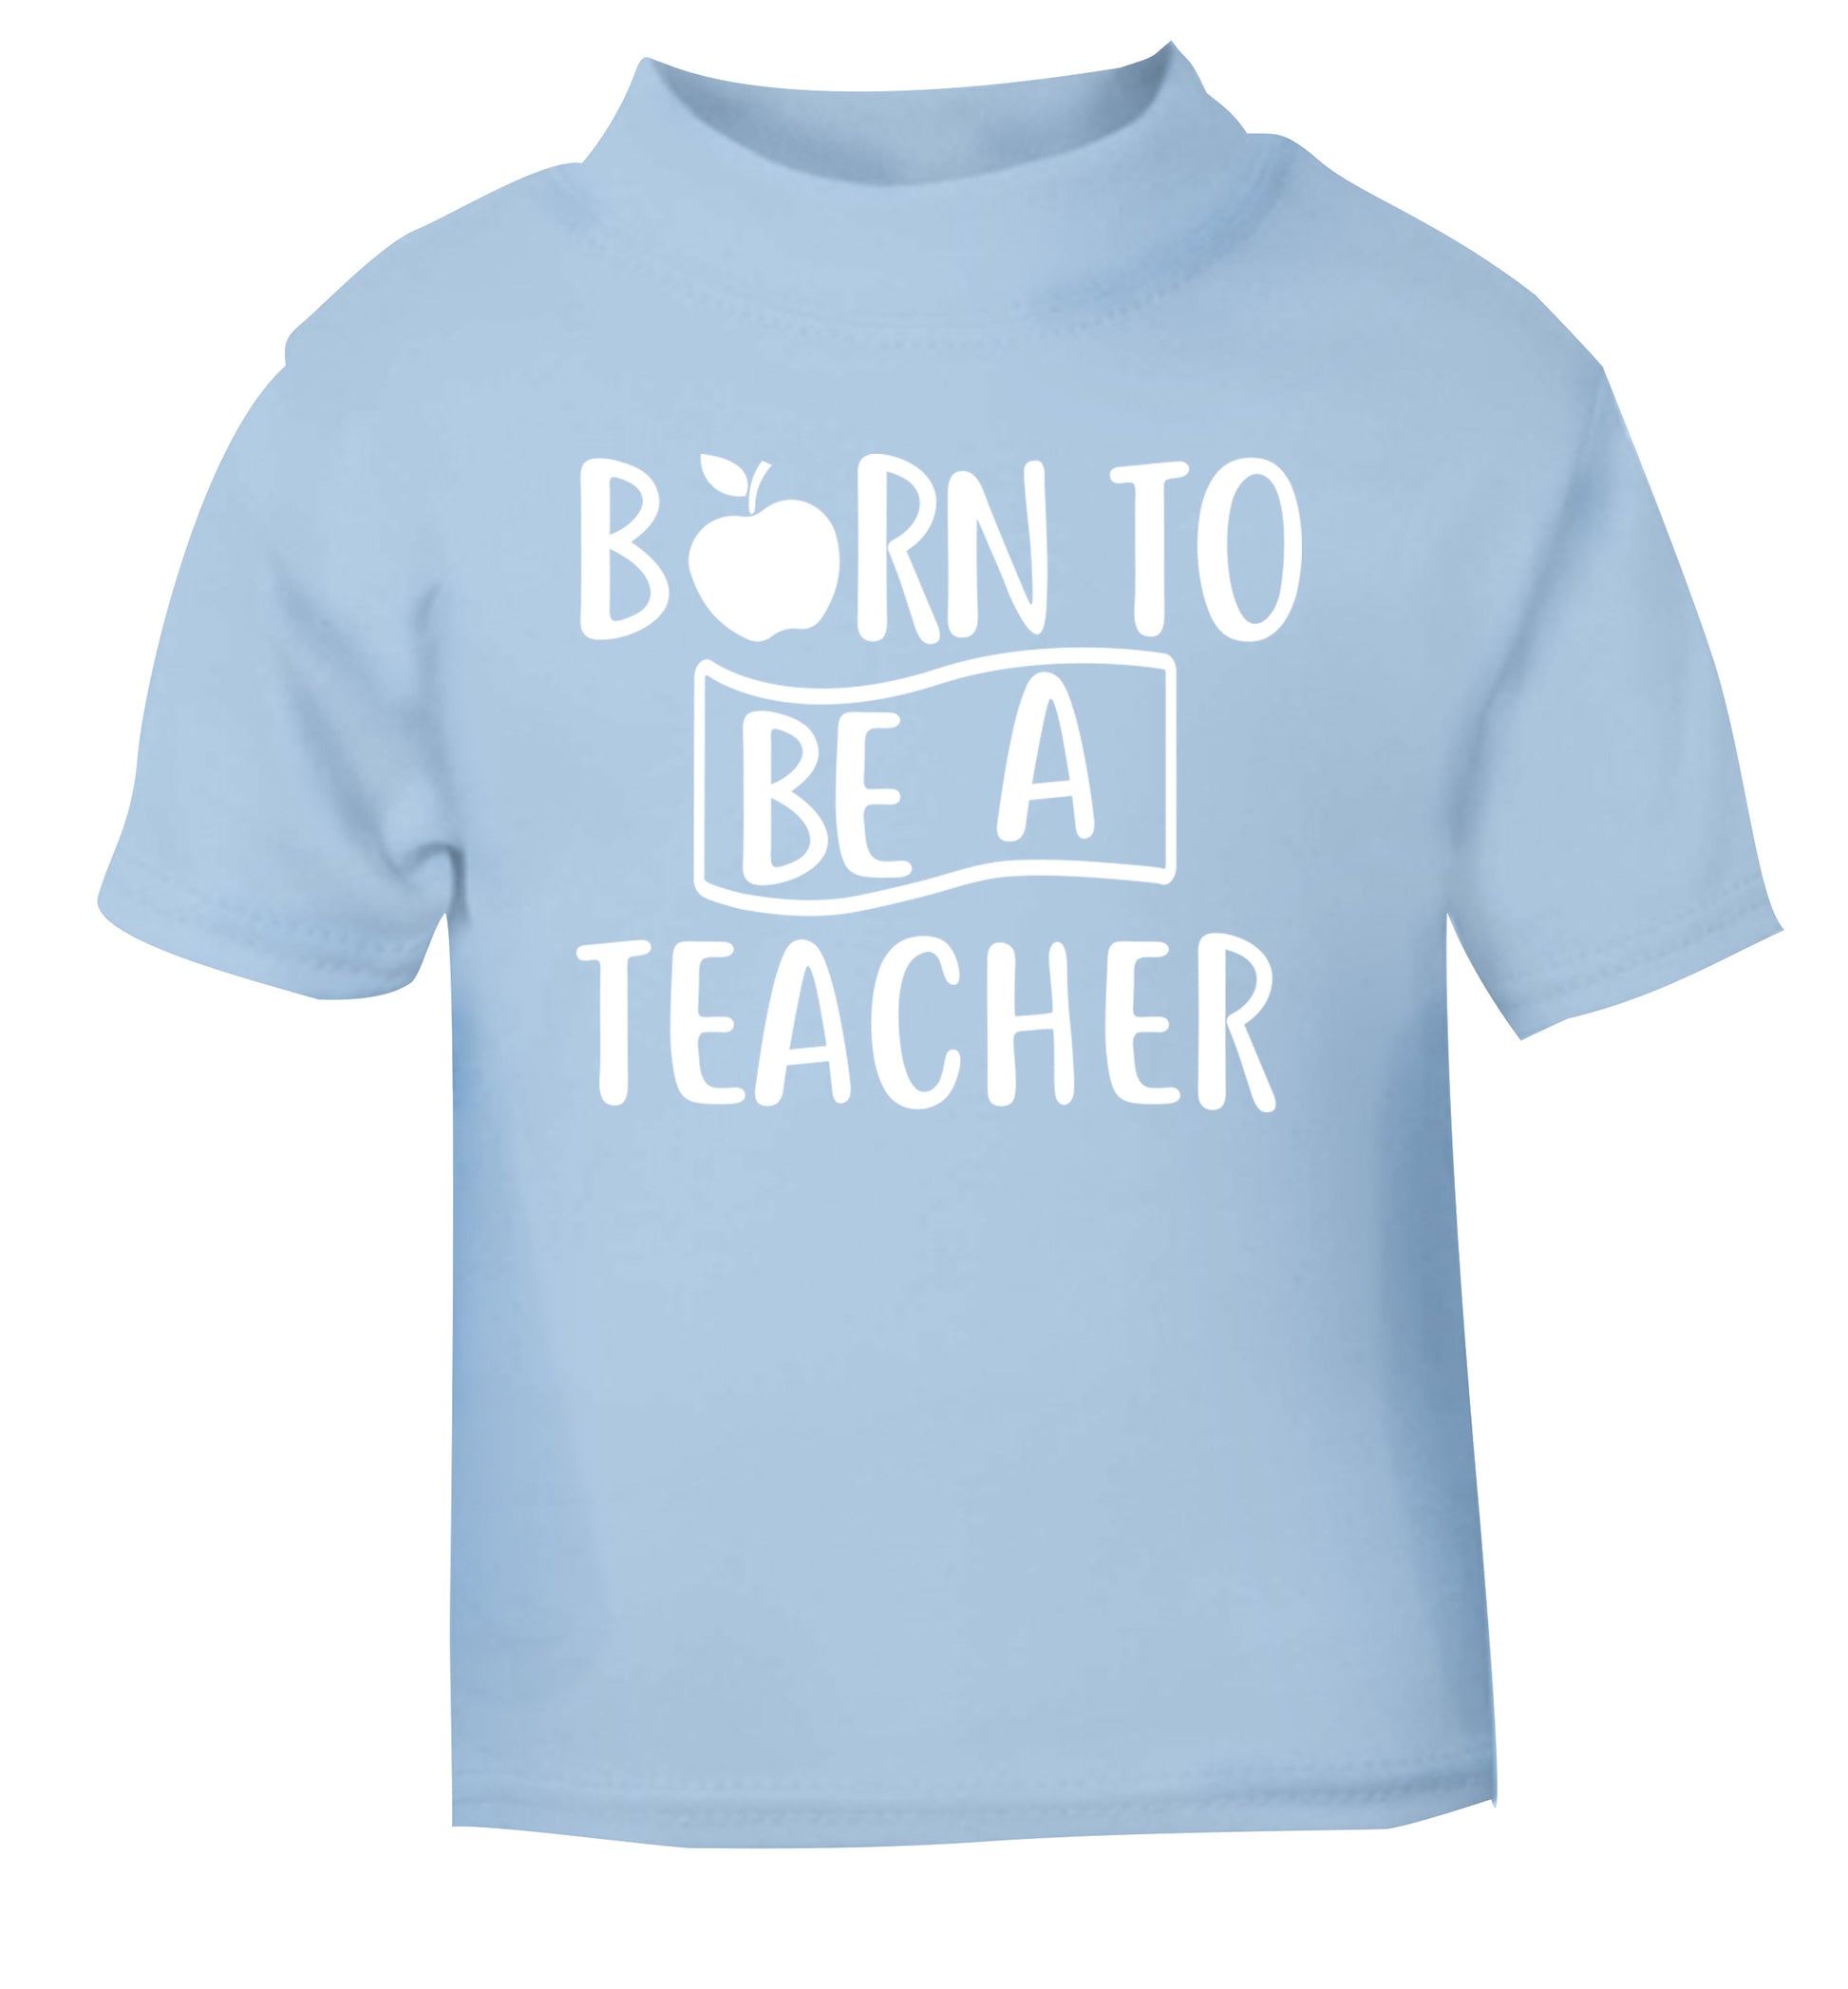 Born to be a teacher light blue Baby Toddler Tshirt 2 Years